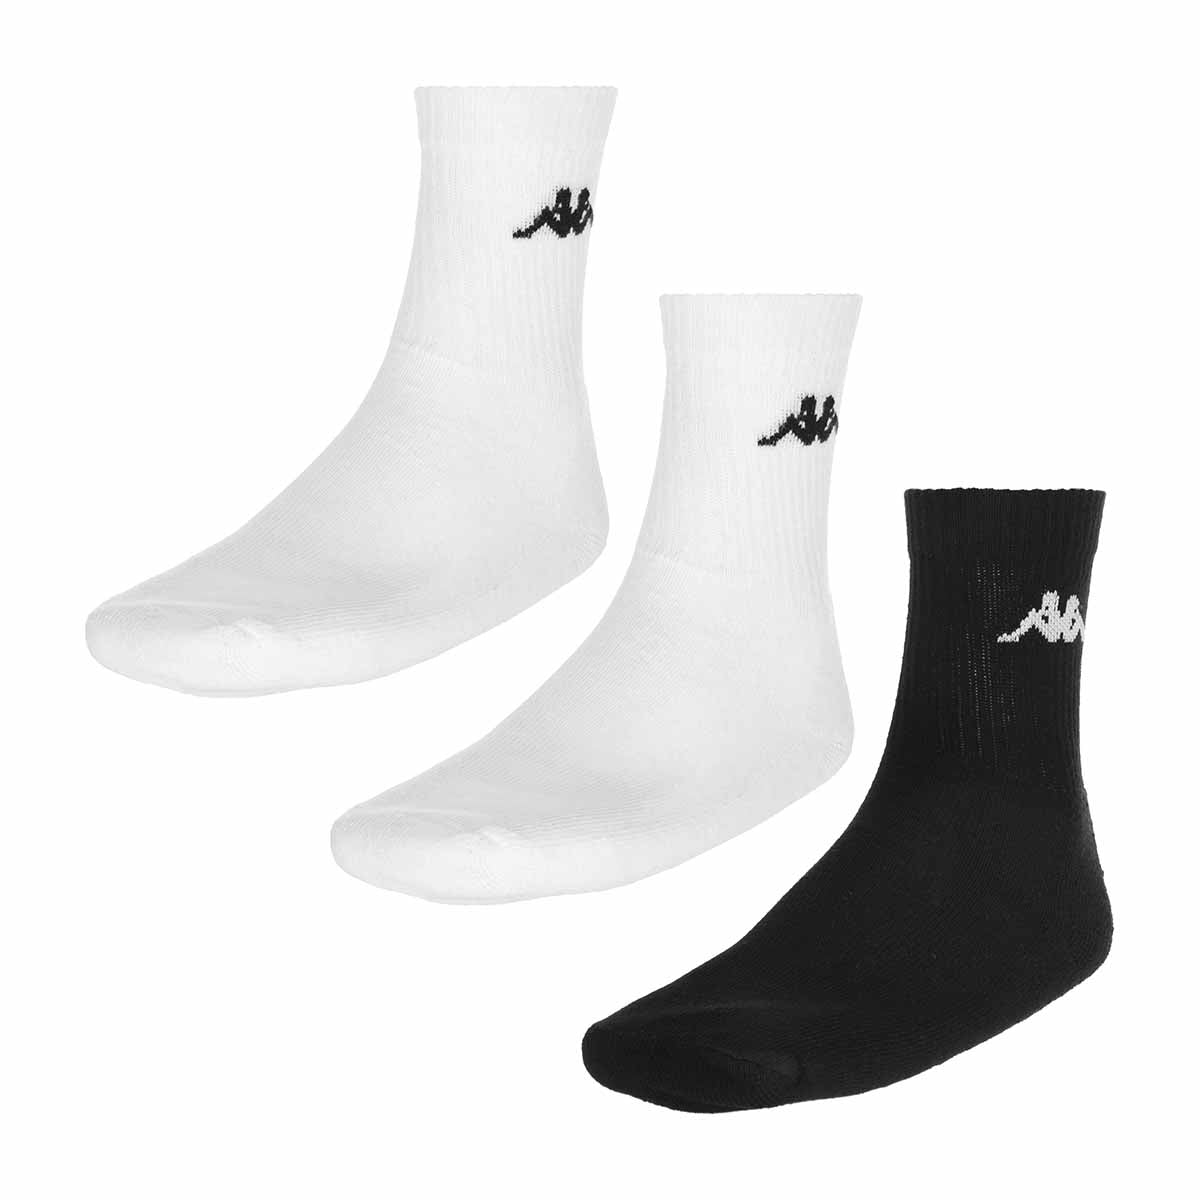 Chaussettes Chimido Blanc (3 paires)